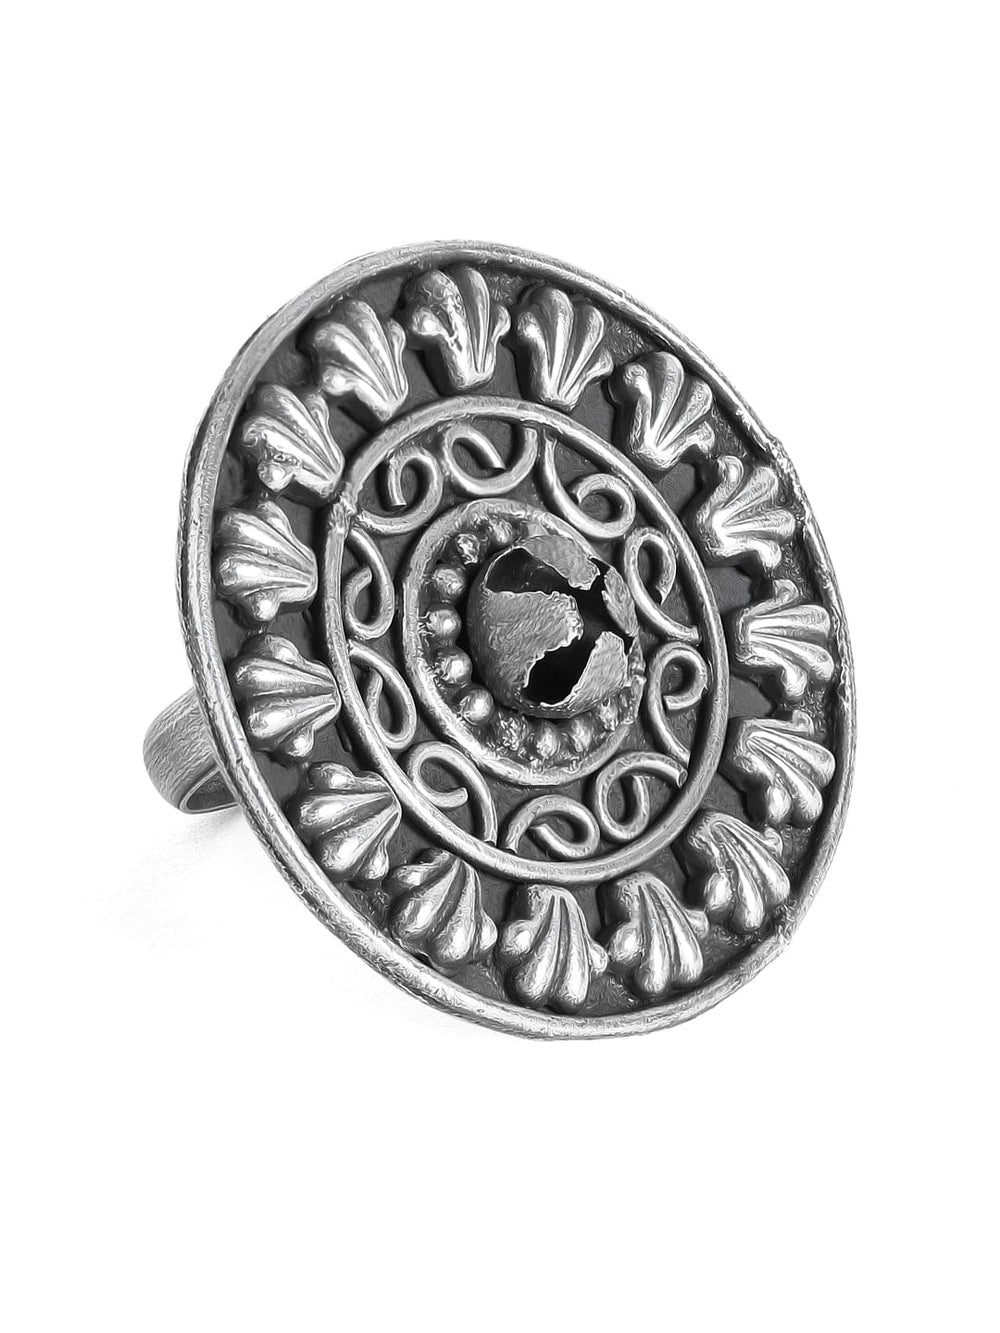 Rubans Oxidised Silver-Plated Floral Filigree Handcrafted Adjustable Finger Ring Rings